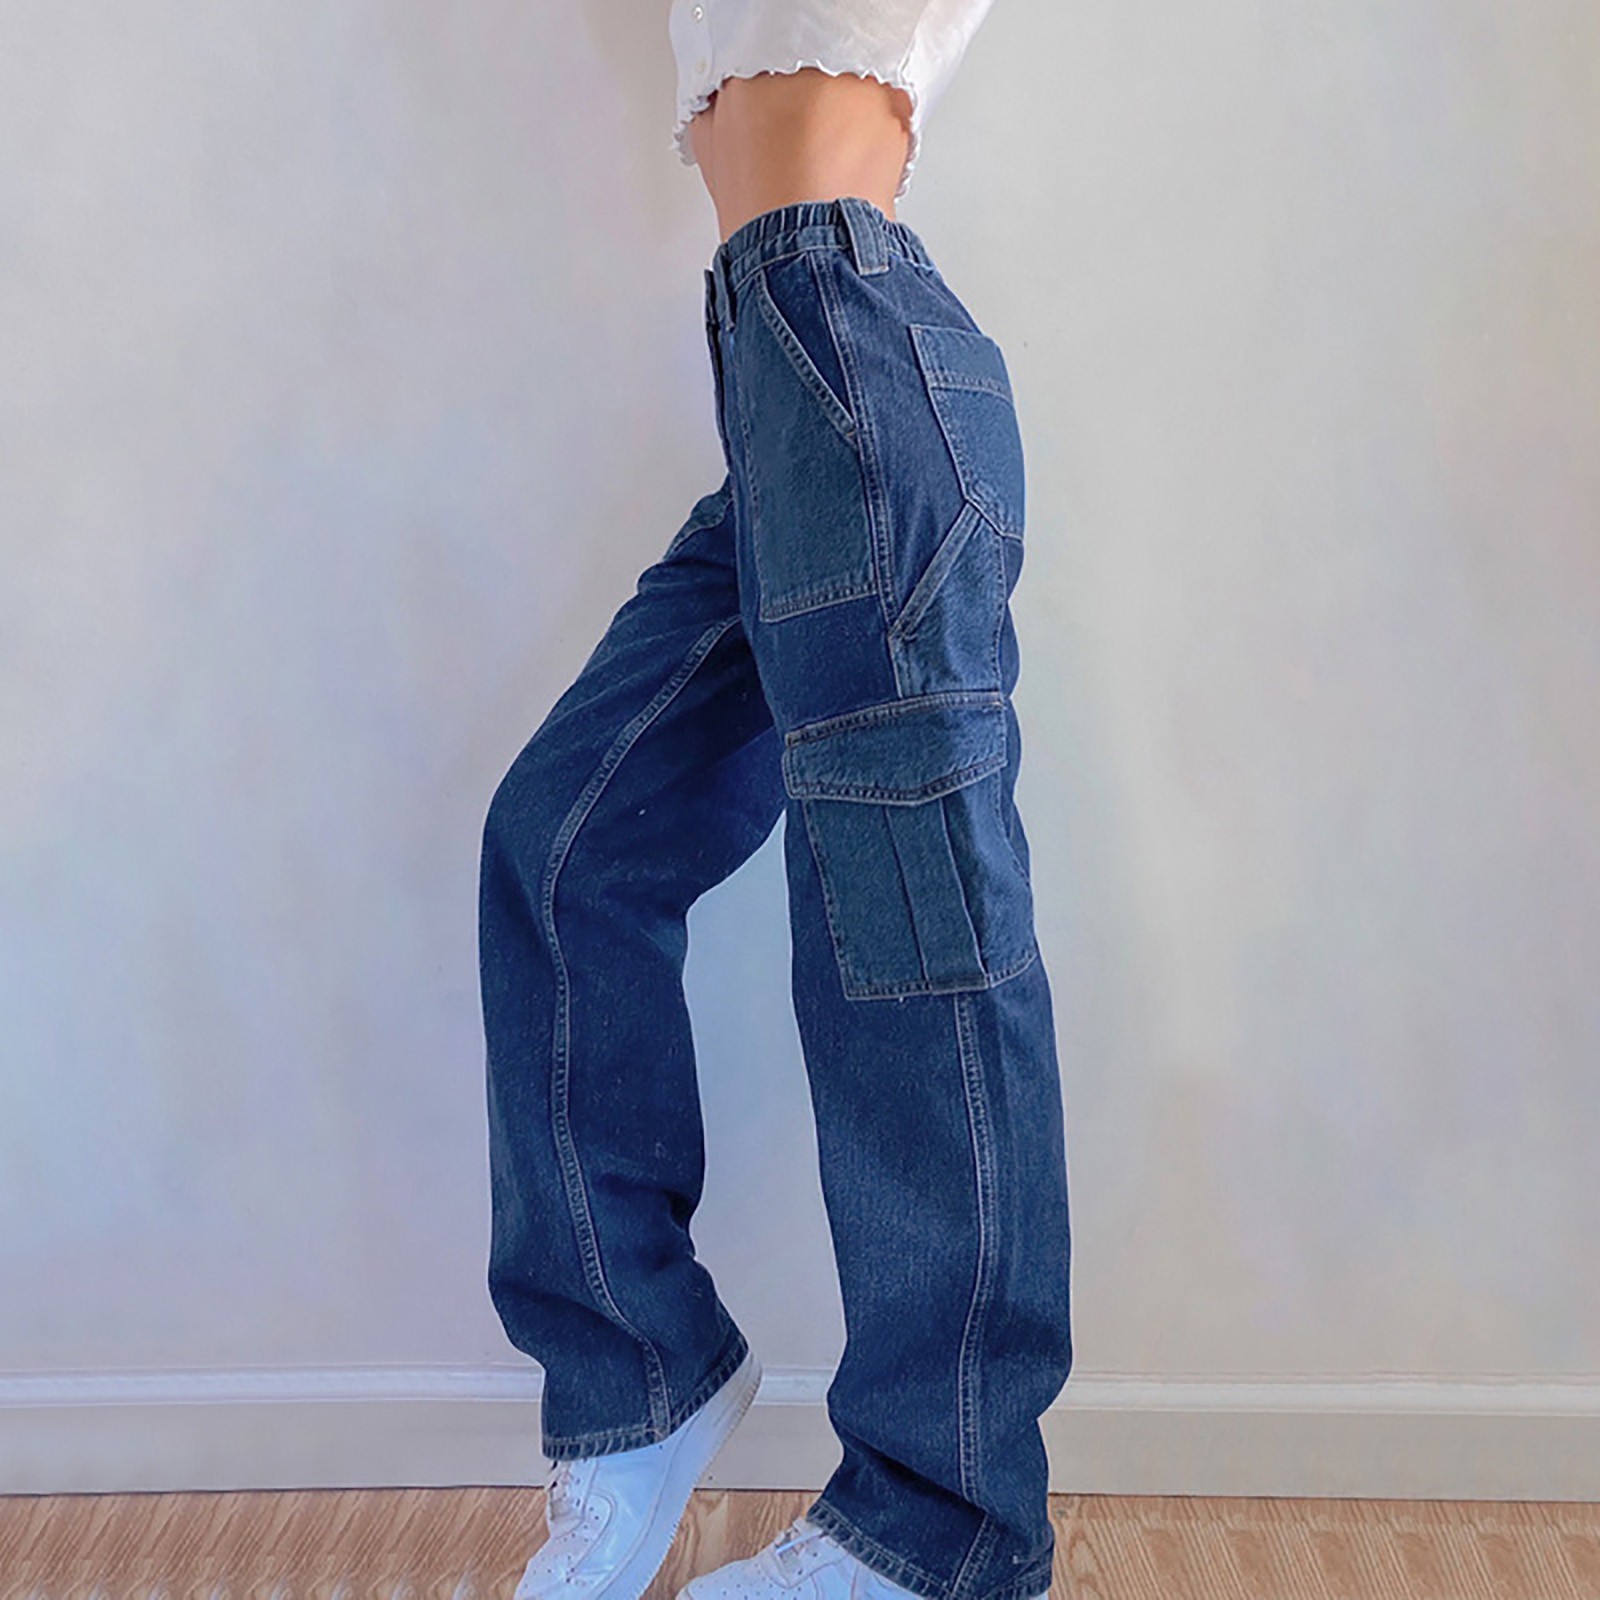 Mchoice Y2K Fashion Jeans for Women High Waist Straight Leg Pants Color Block Baggy Denim Jeans Trousers Vintage Streetwear on Clearance - image 3 of 7